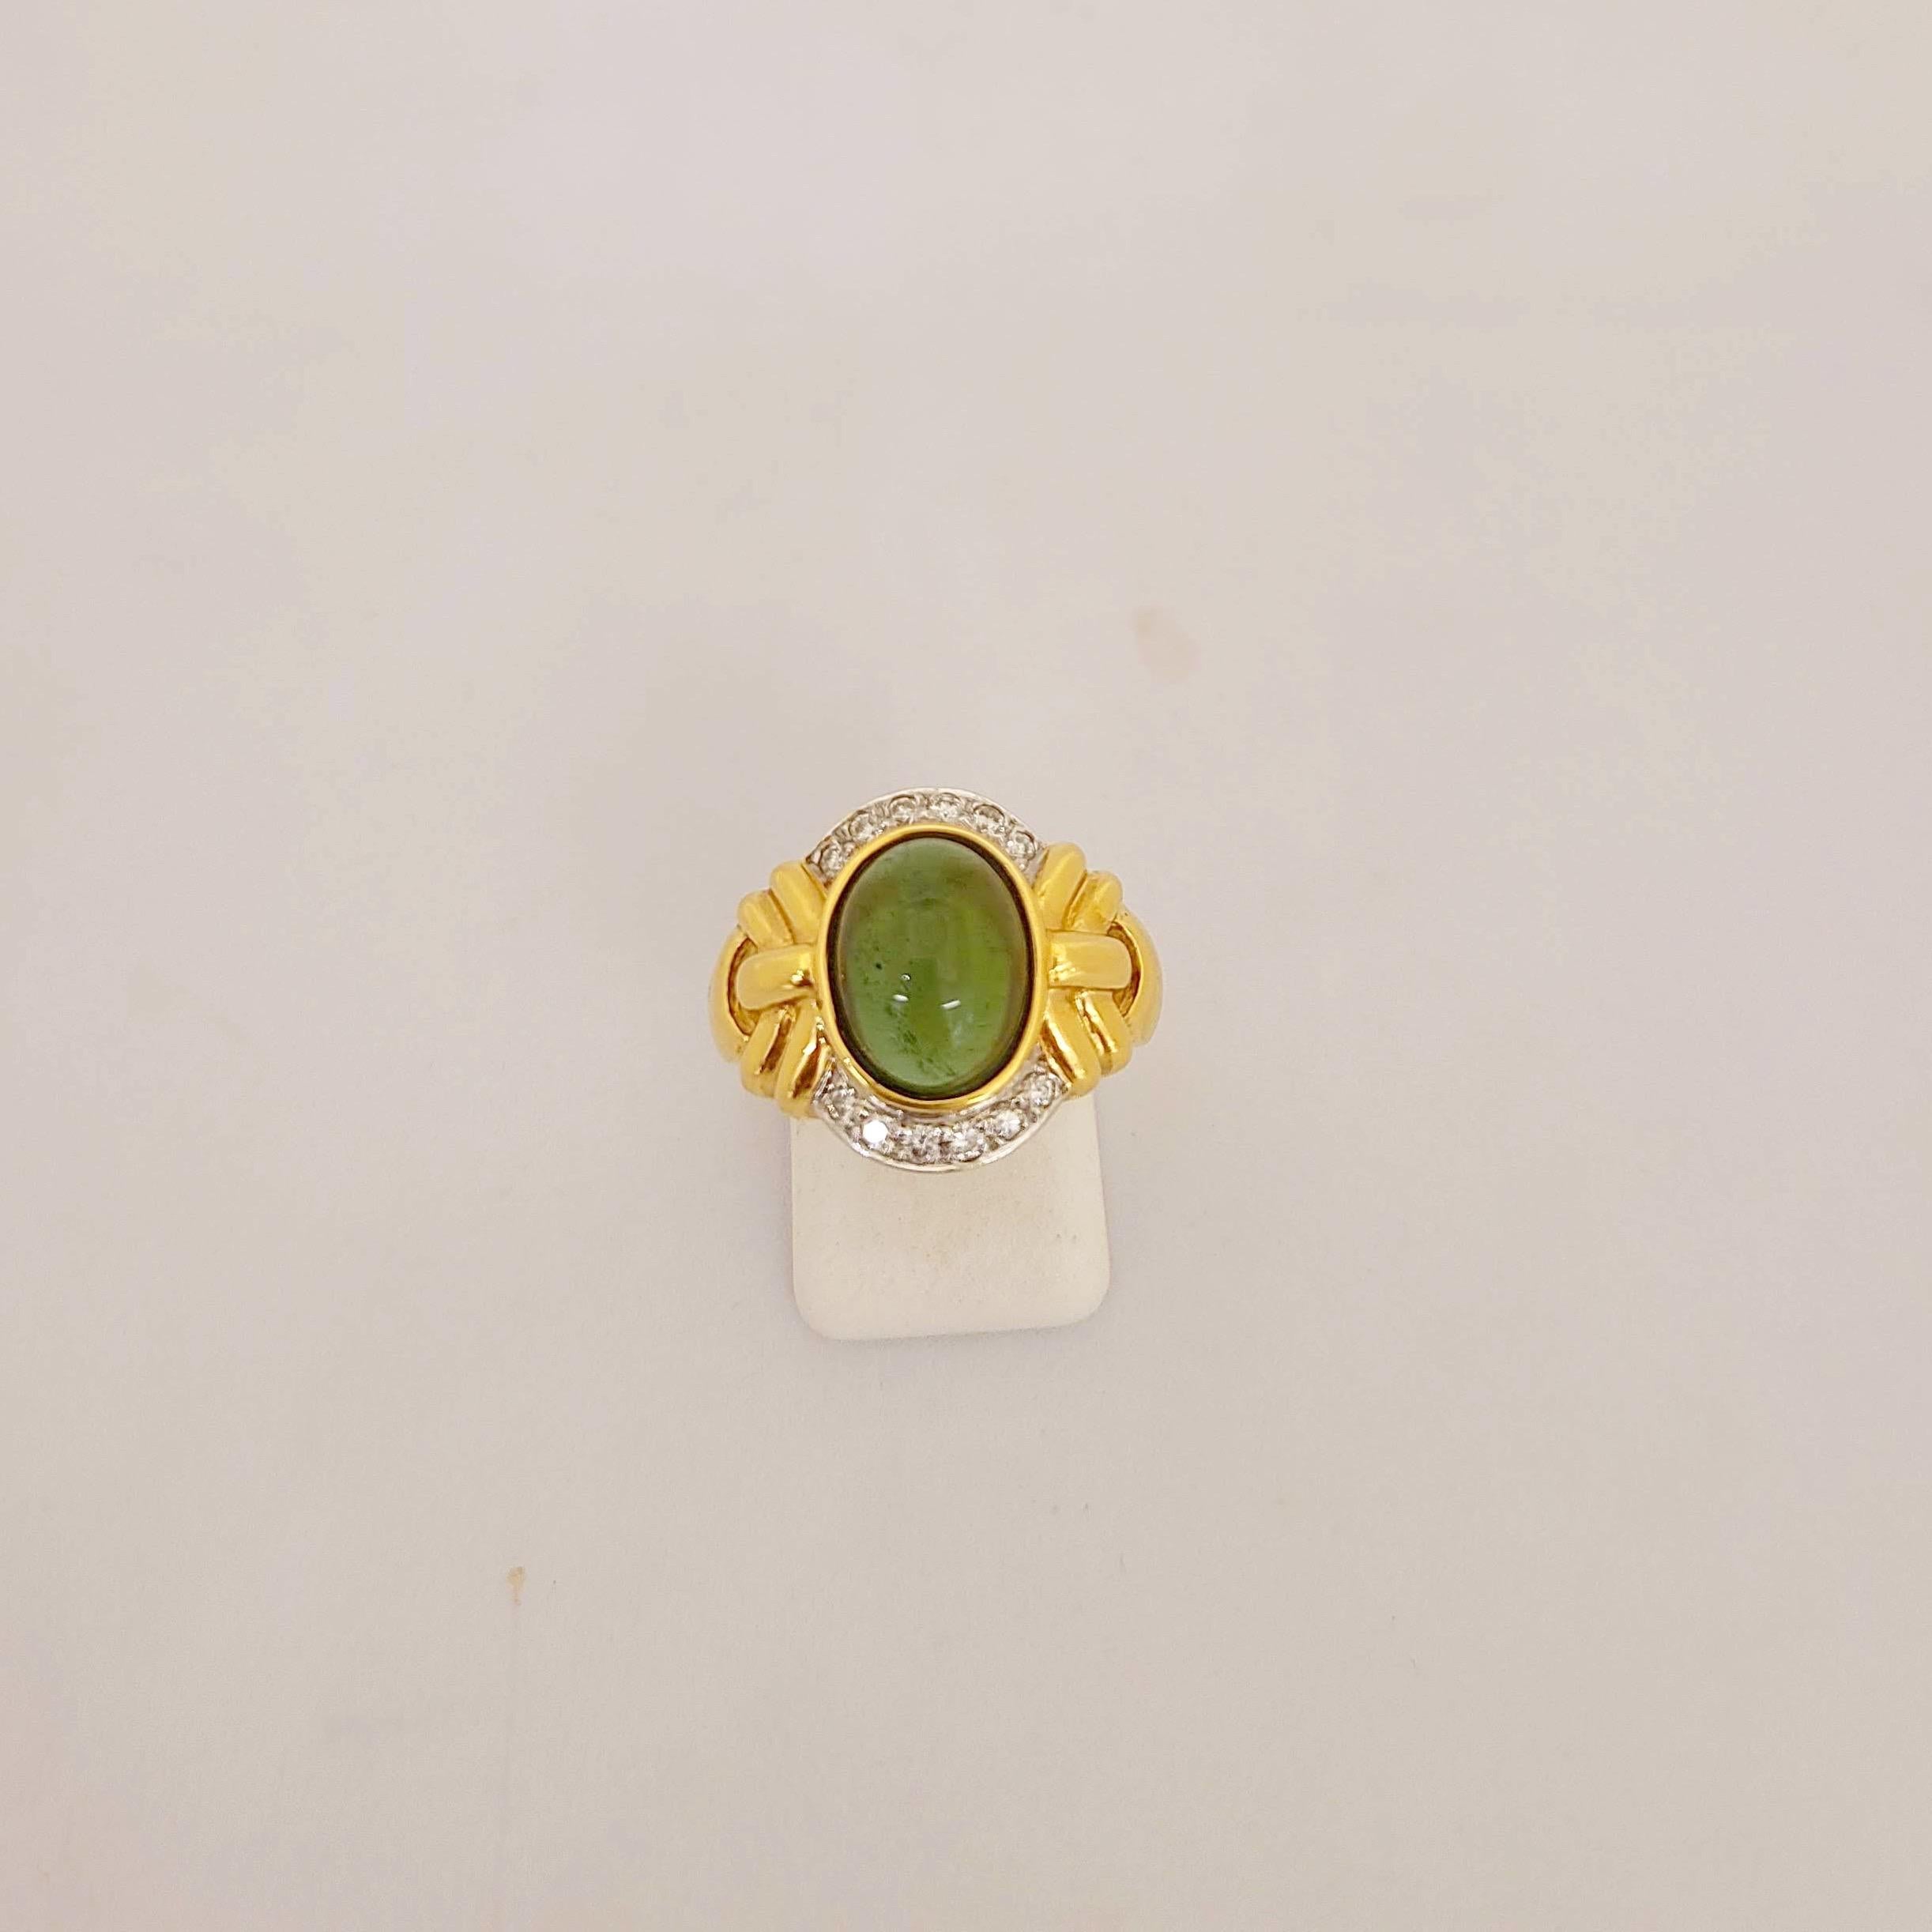  Cabochon oval green tourmaline center stone with diamond accents set in 18 kt yellow gold.
Diamond weight 0.25 carats
Stamped 750
Ring size 6.25  sizing options may be available